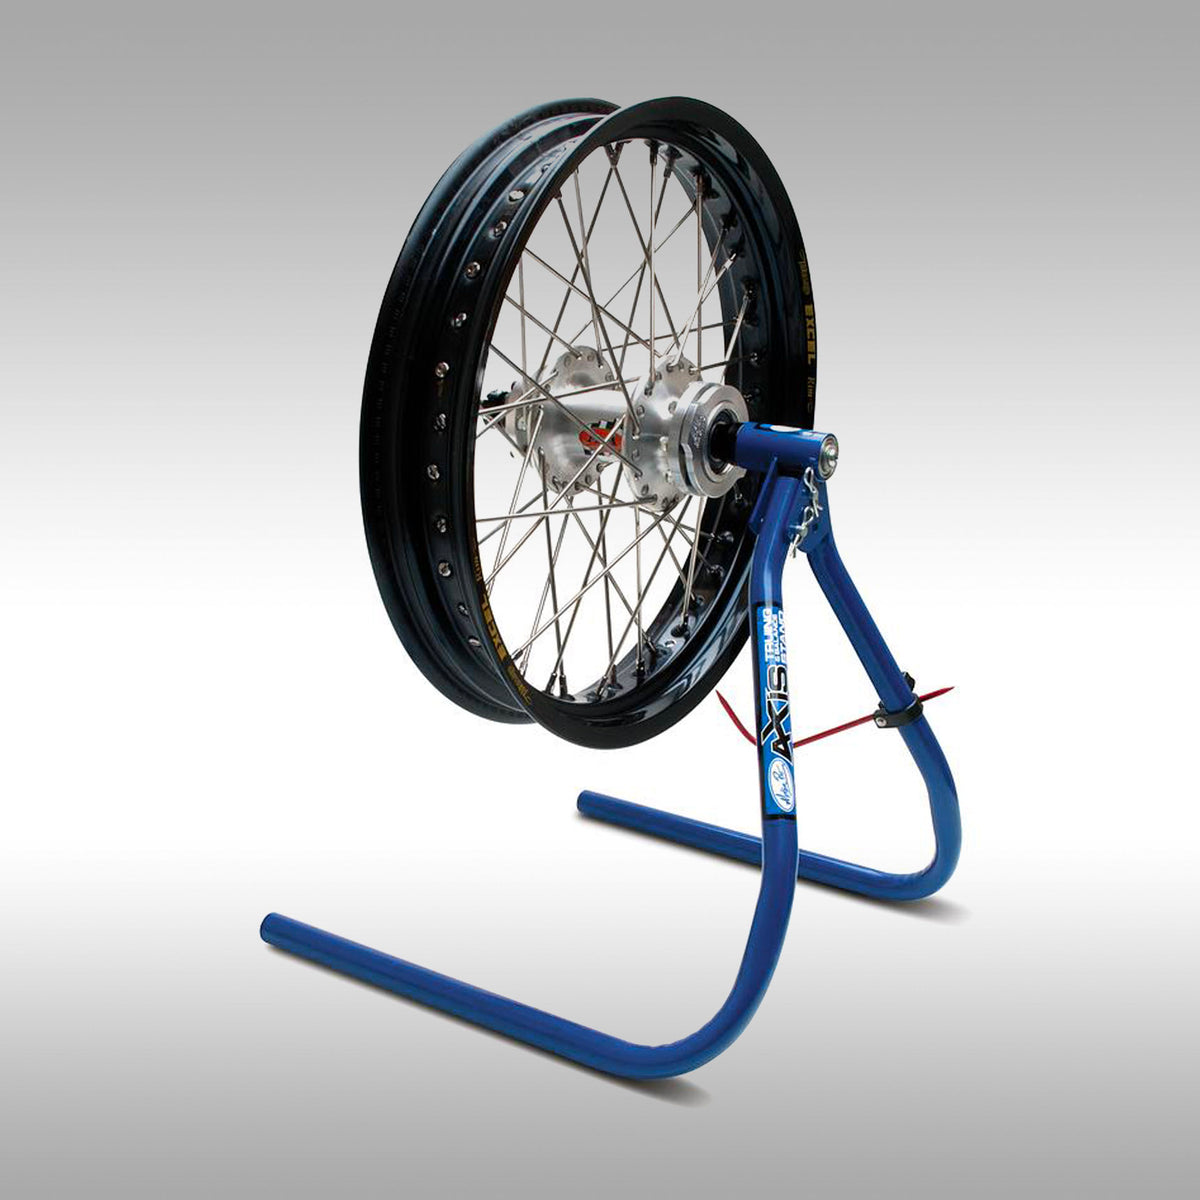 Motion Pro AXIS wheel truing and balancing stand is a great tool for any shop. Keeping your wheels properly maintained and balanced will save you money in wear and tear and shop costs. Motorcycle maintenance. Motorcycle maintenance tools for wheel and tire. Motion Pro tools for motorcycles. 